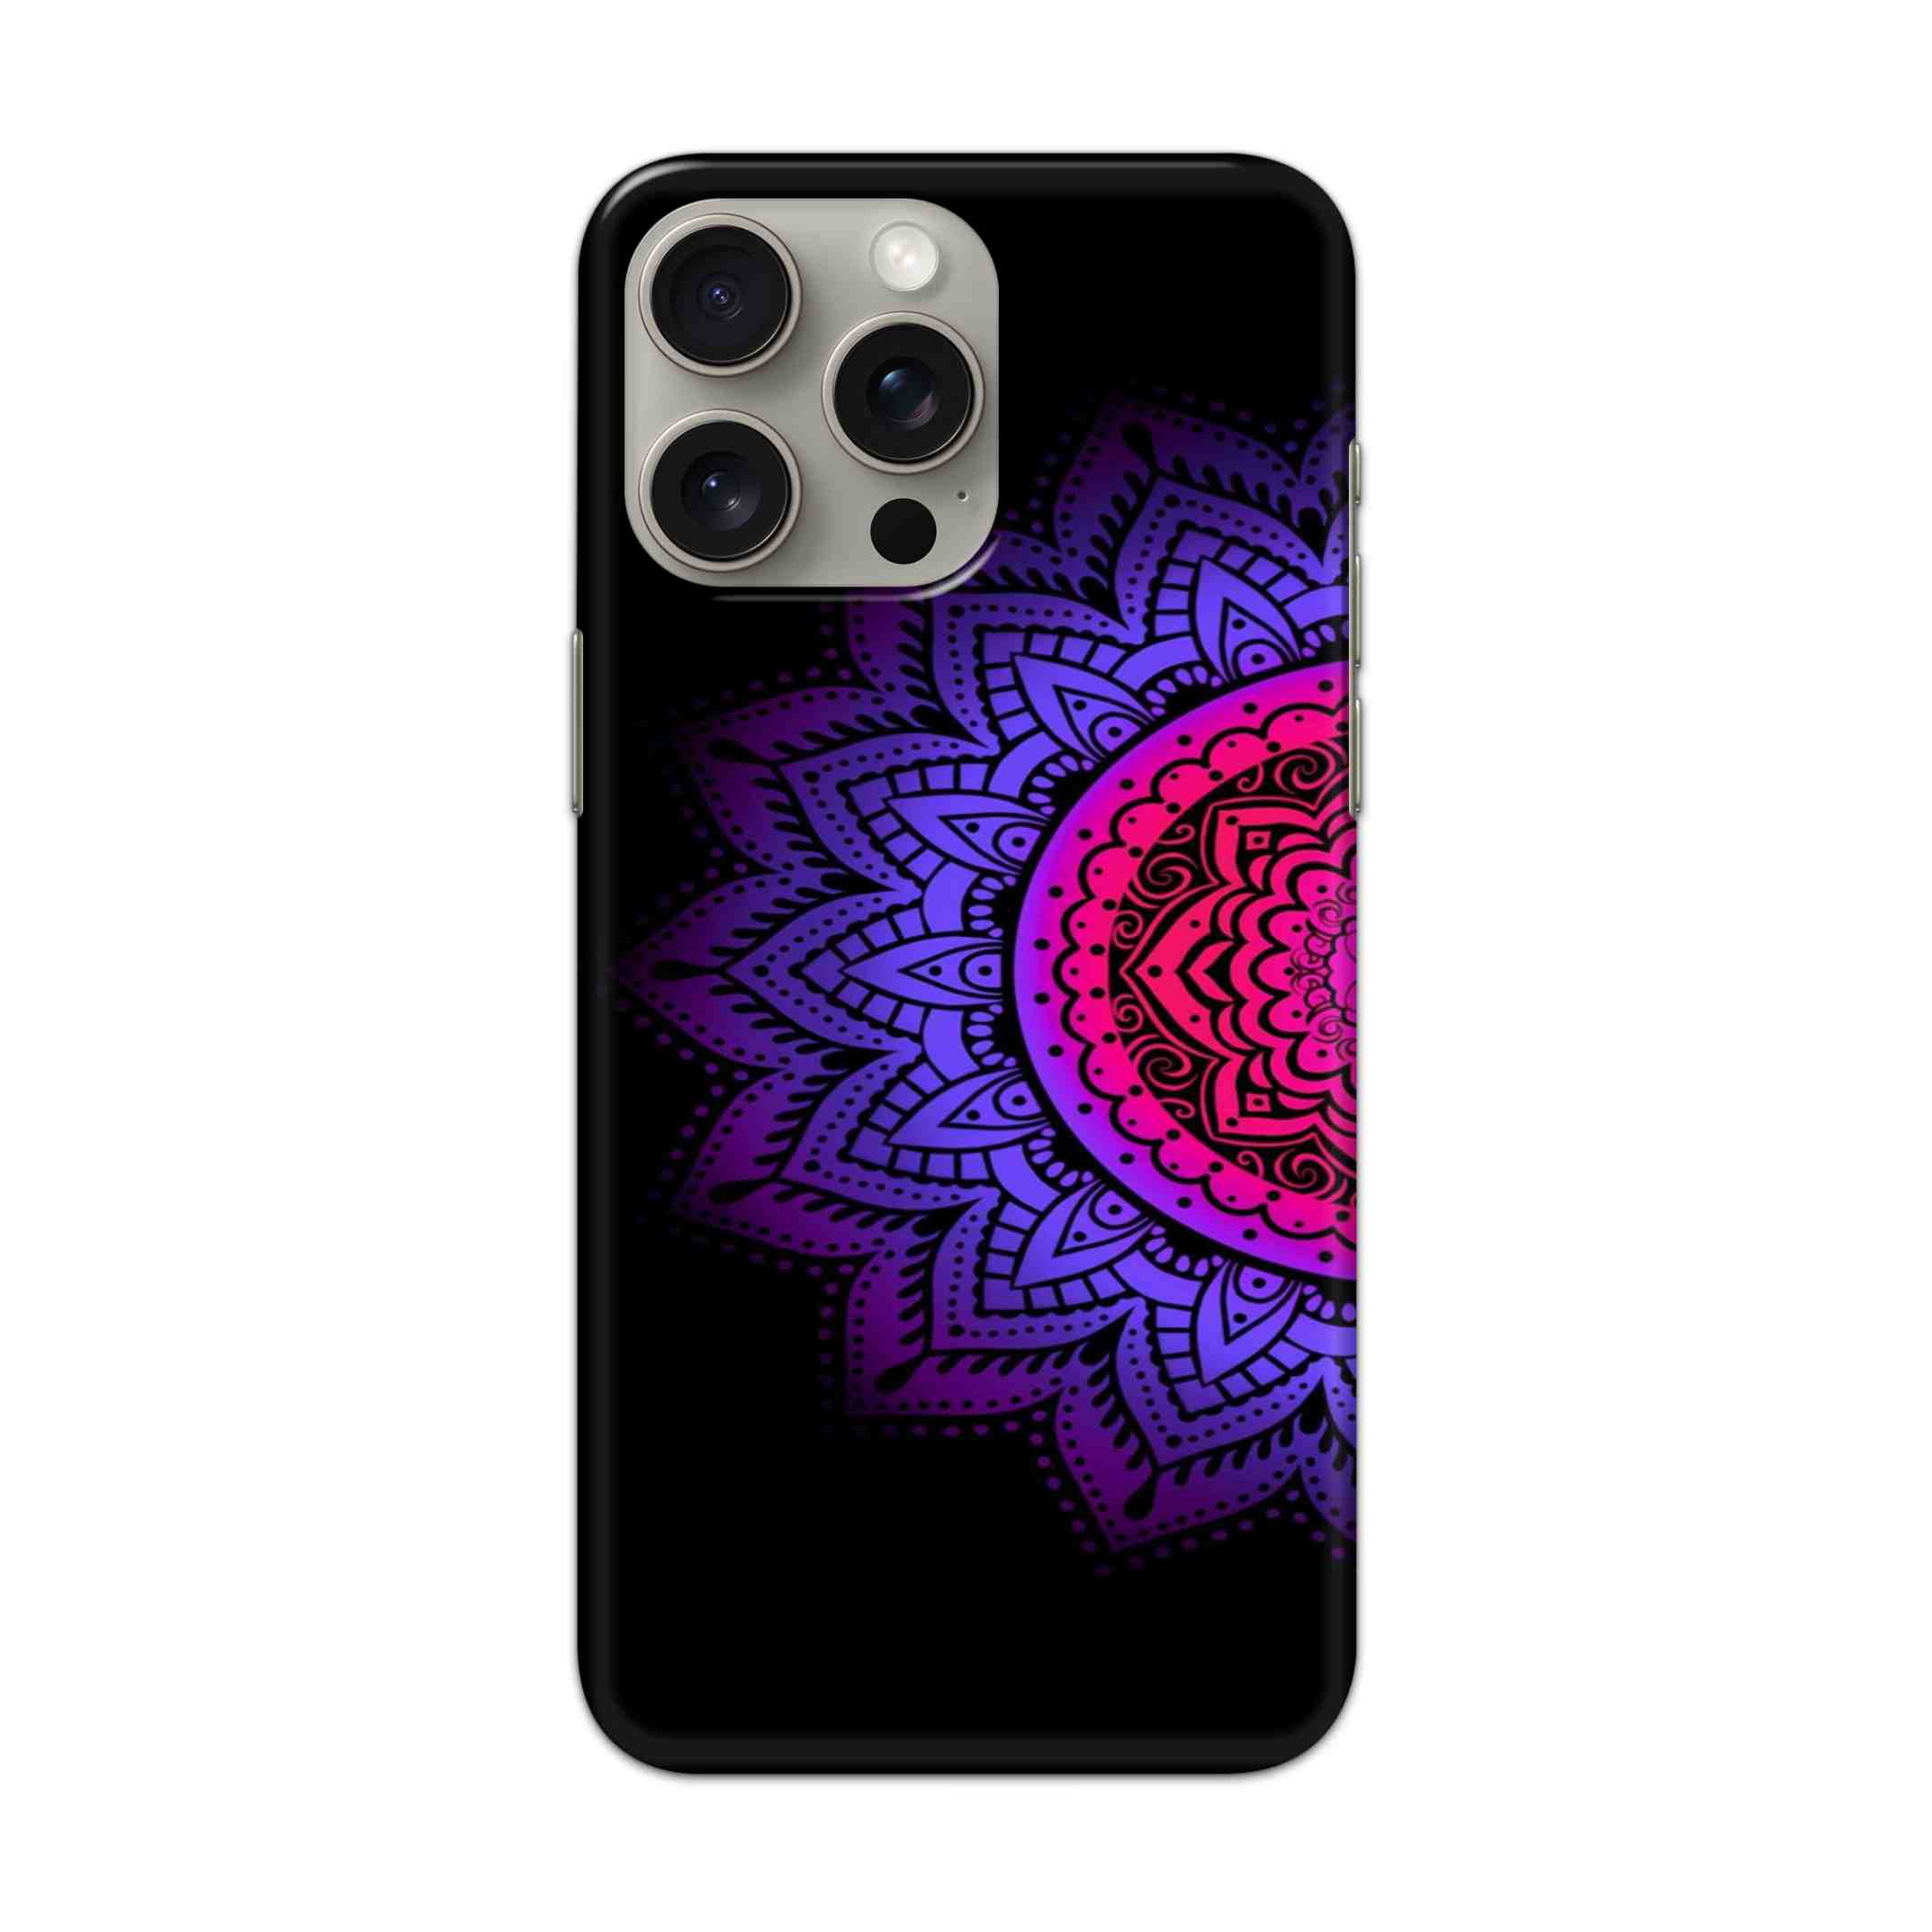 Buy Christian Mandalas Hard Back Mobile Phone Case/Cover For iPhone 15 Pro Max Online